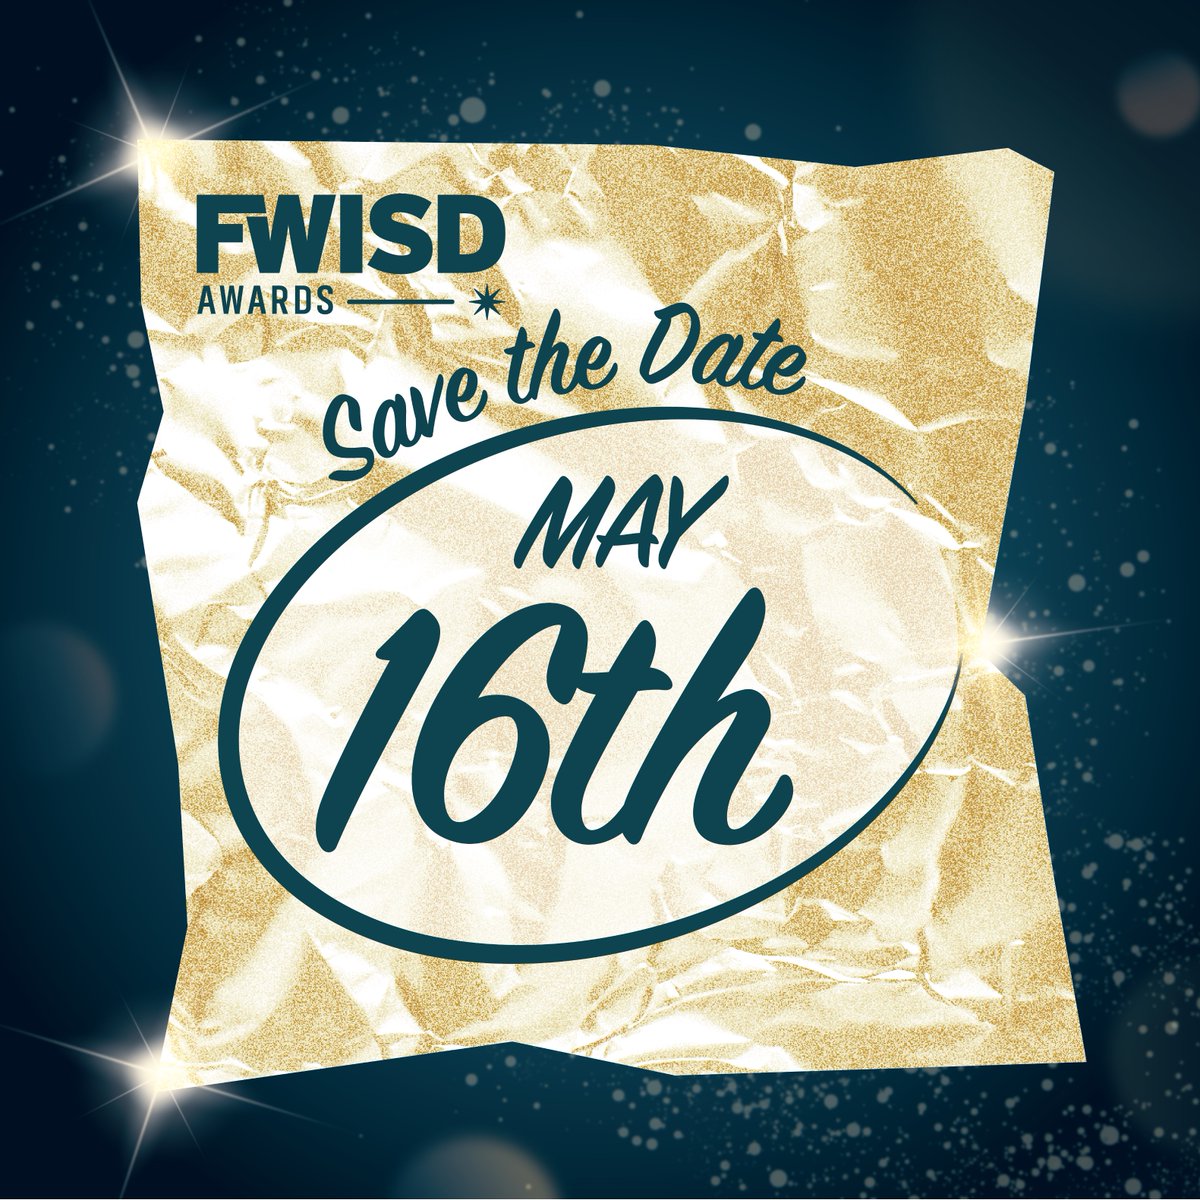 Get ready to applaud excellence in education! 🎉 The FWISD Awards are right around the corner—any guesses 🤔💭 on this year's winners? Check out all the finalists for the FWISD Awards at fwisd.org/awards-finalis…!